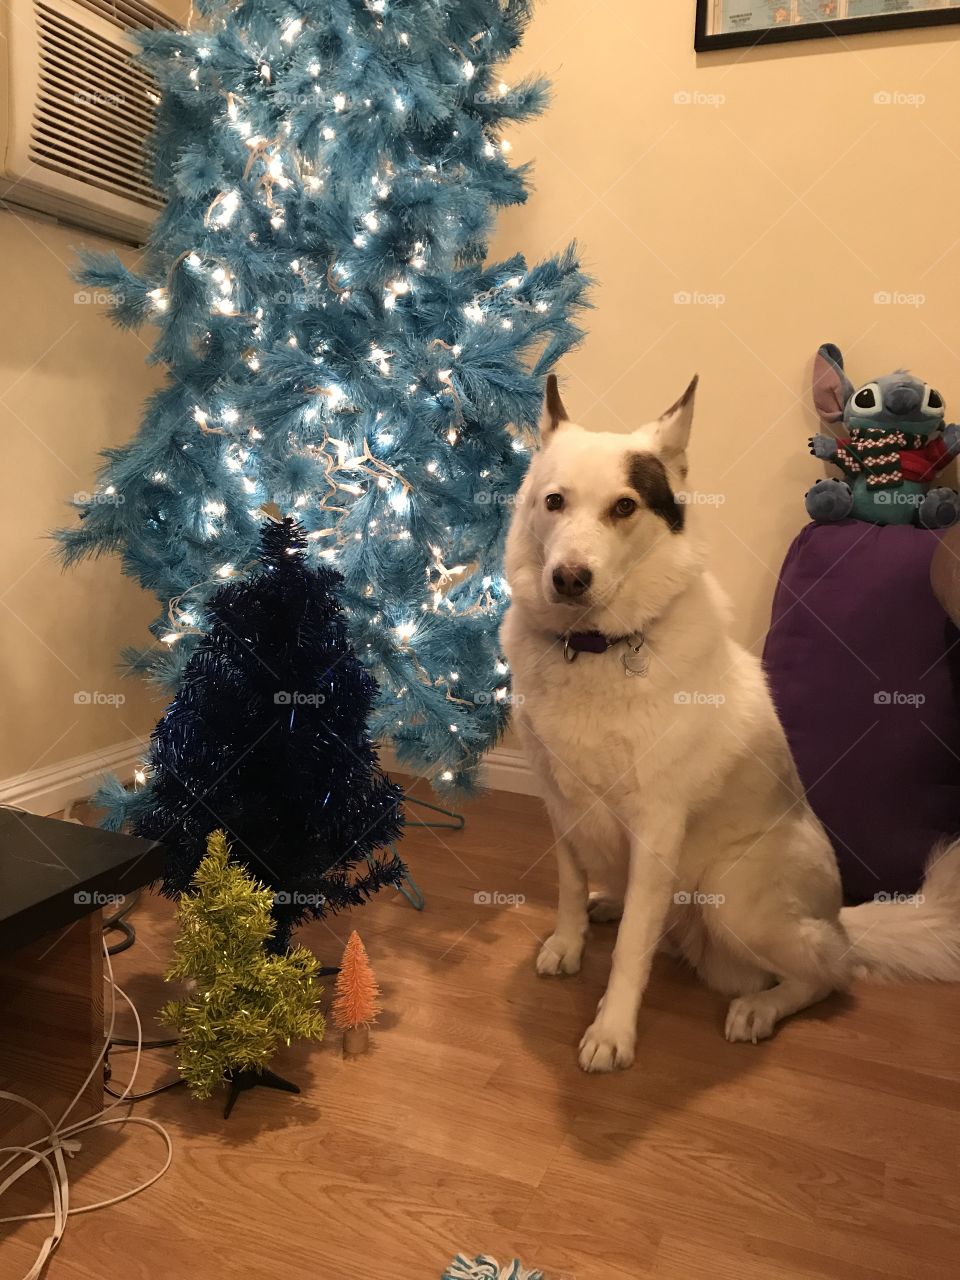 Dog in front of brightly colored Christmas trees
